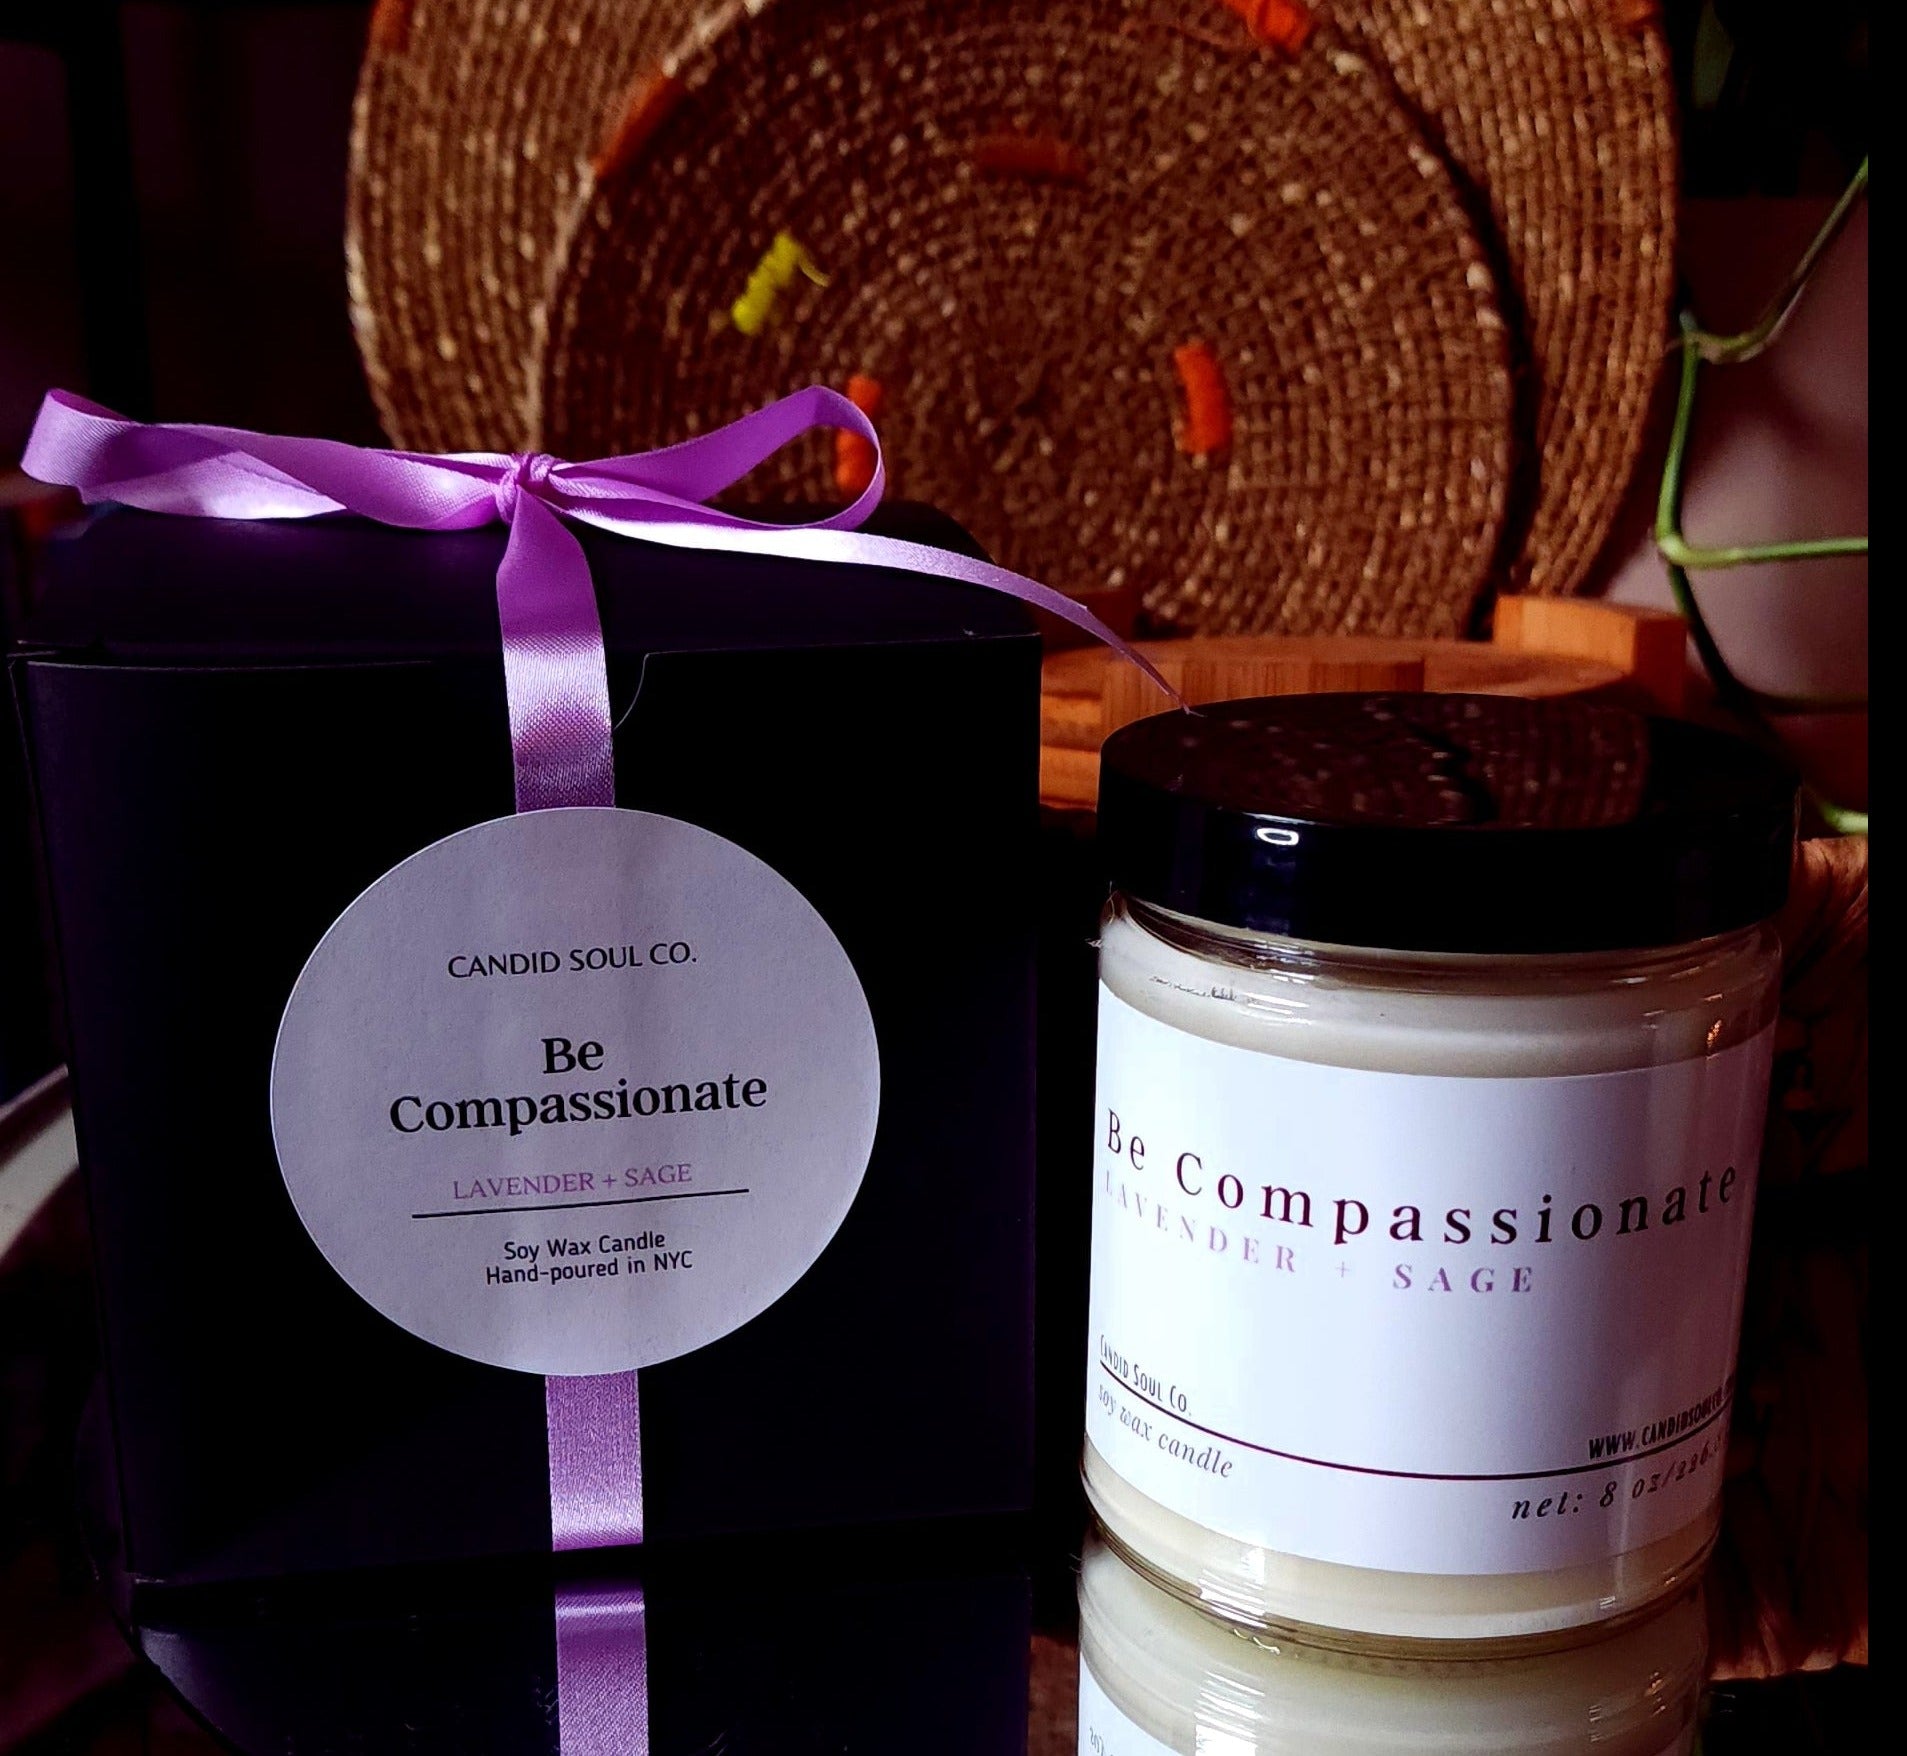 Lavender + Sage soy wax affirmation candle with Gift Box